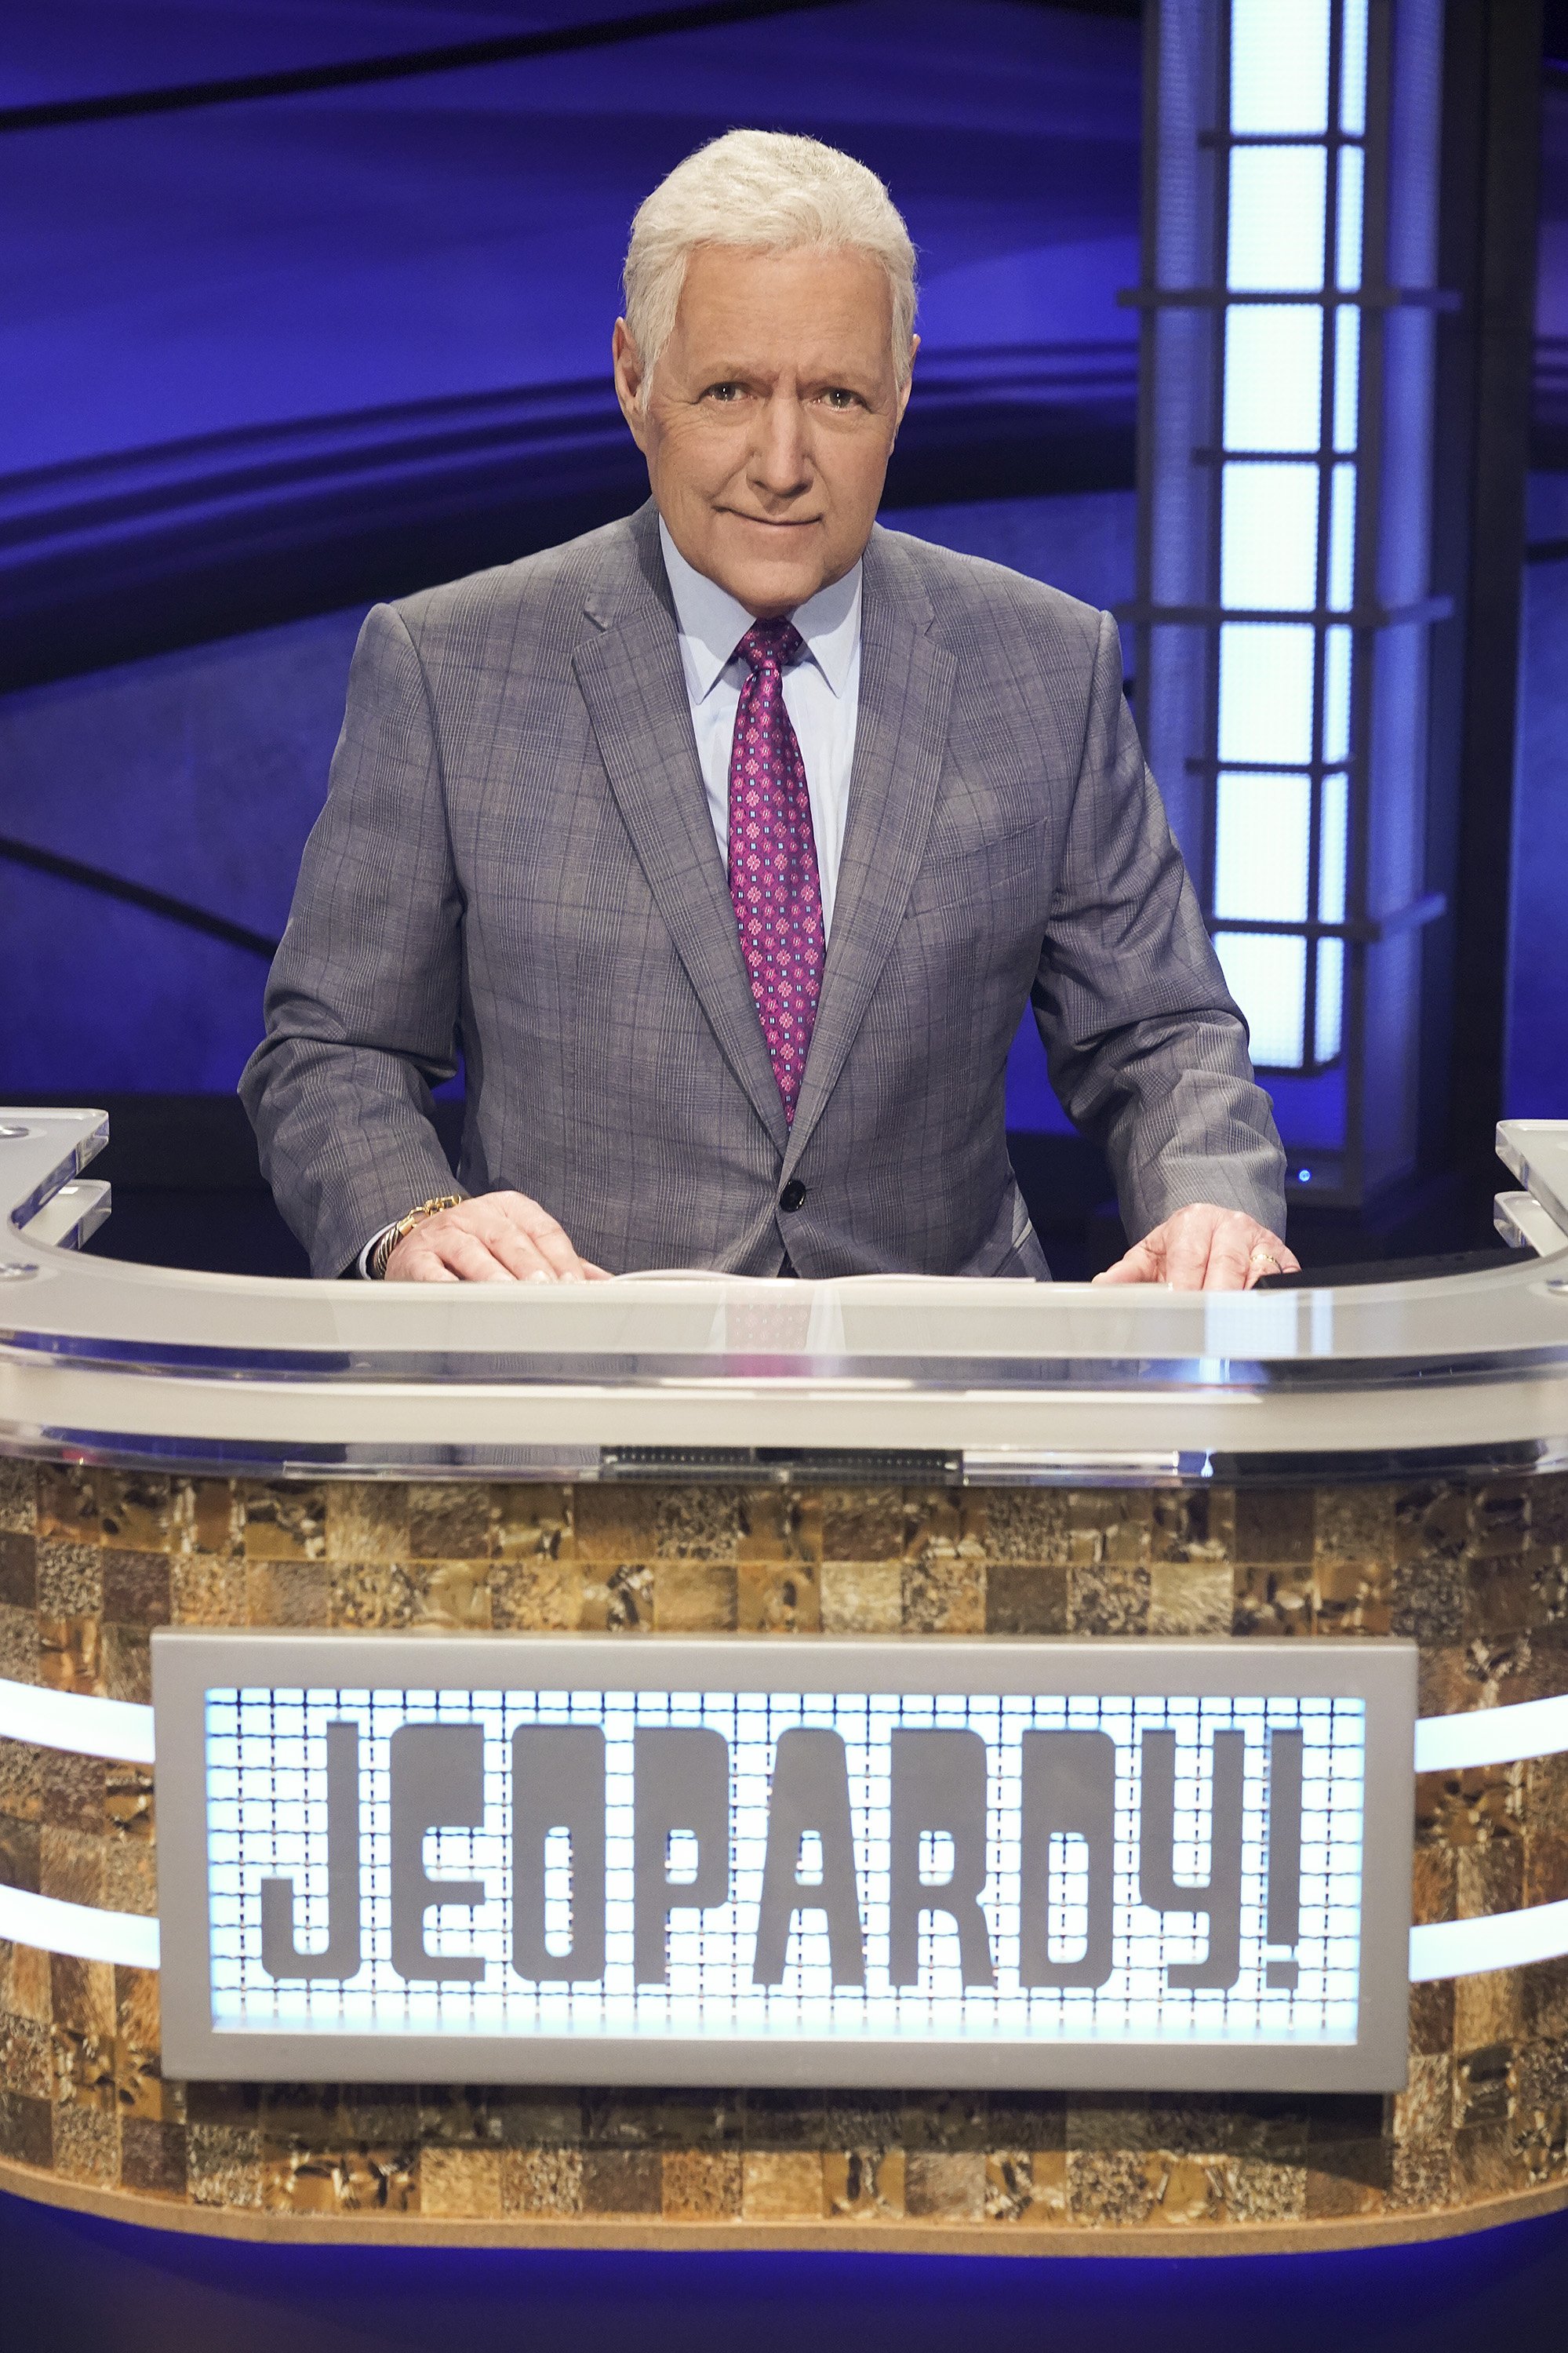 Alex Trebek pictured behind the "Jeopardy!" lectern on an episode of the show. | Photo: Getty Images